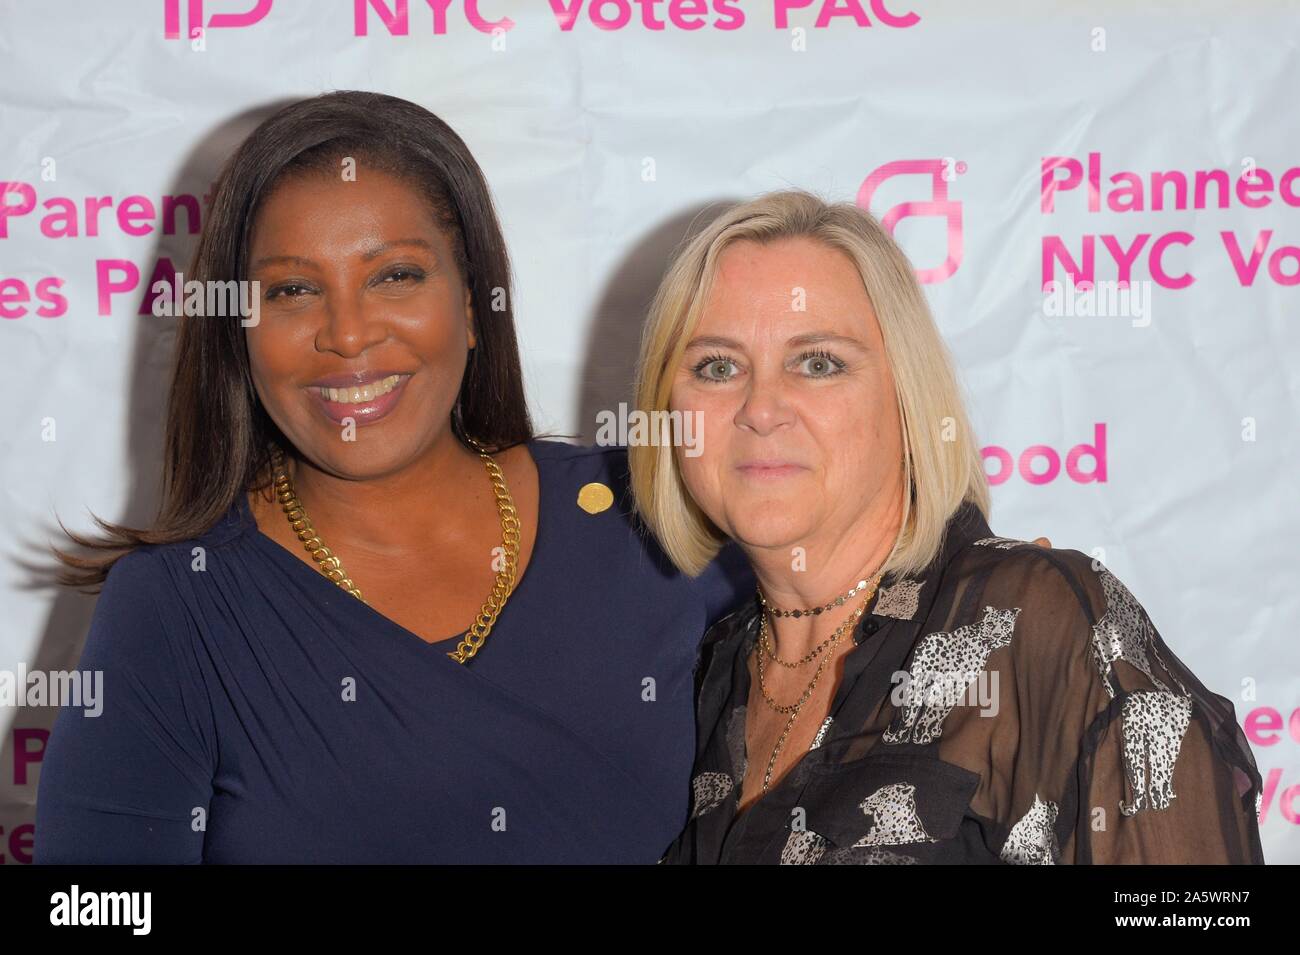 NEW YORK, NY - OCTOBER 21: Laura McQuade and Letitia James attend the Planned Parenthood NYC Votes PAC Annual Benefit at 620 Loft & Garden on October Stock Photo